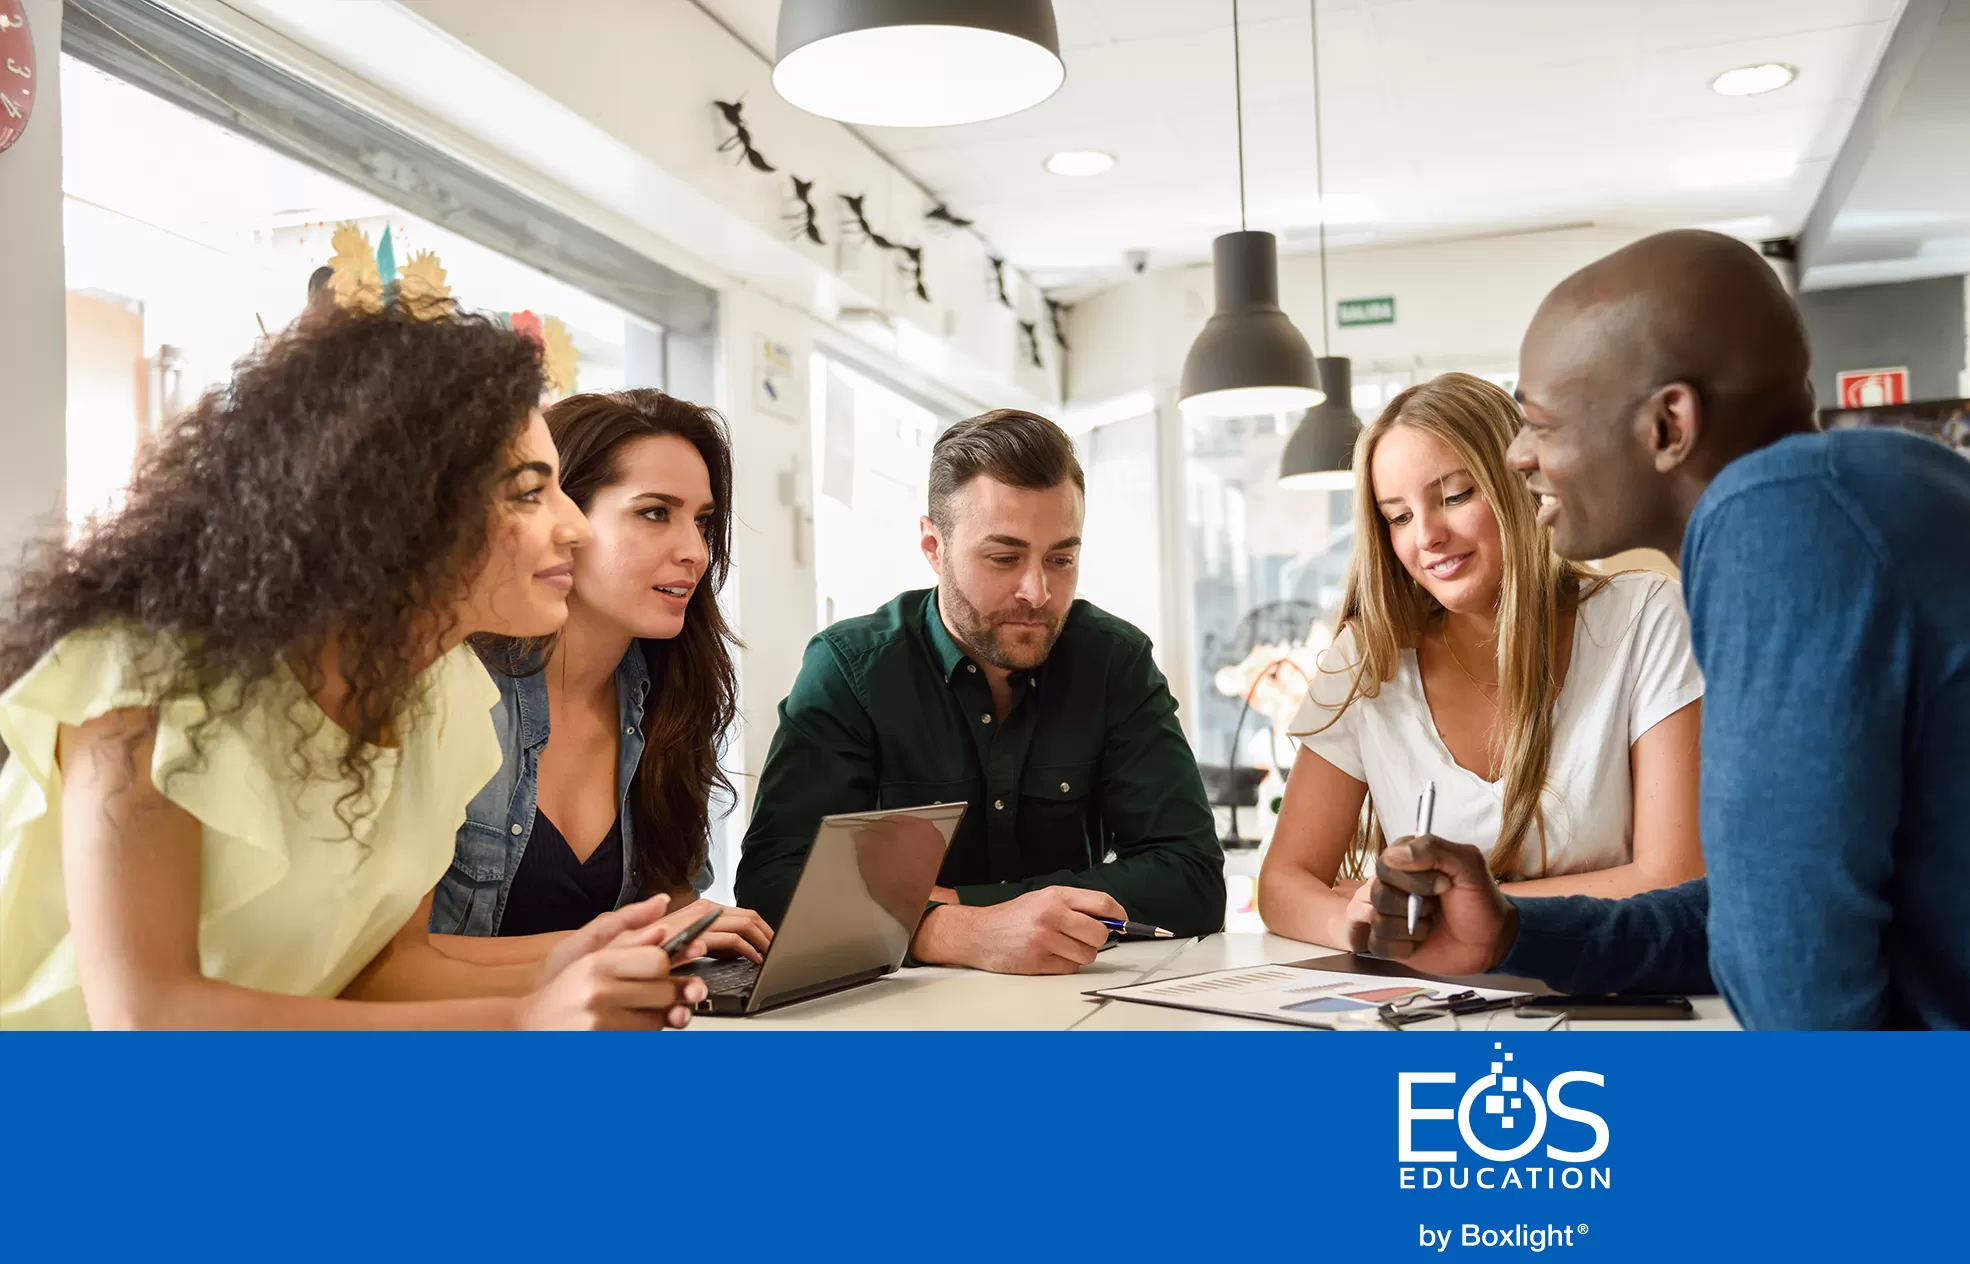 people round a table having a discussion with EOS logo in a blue banner at the bottom